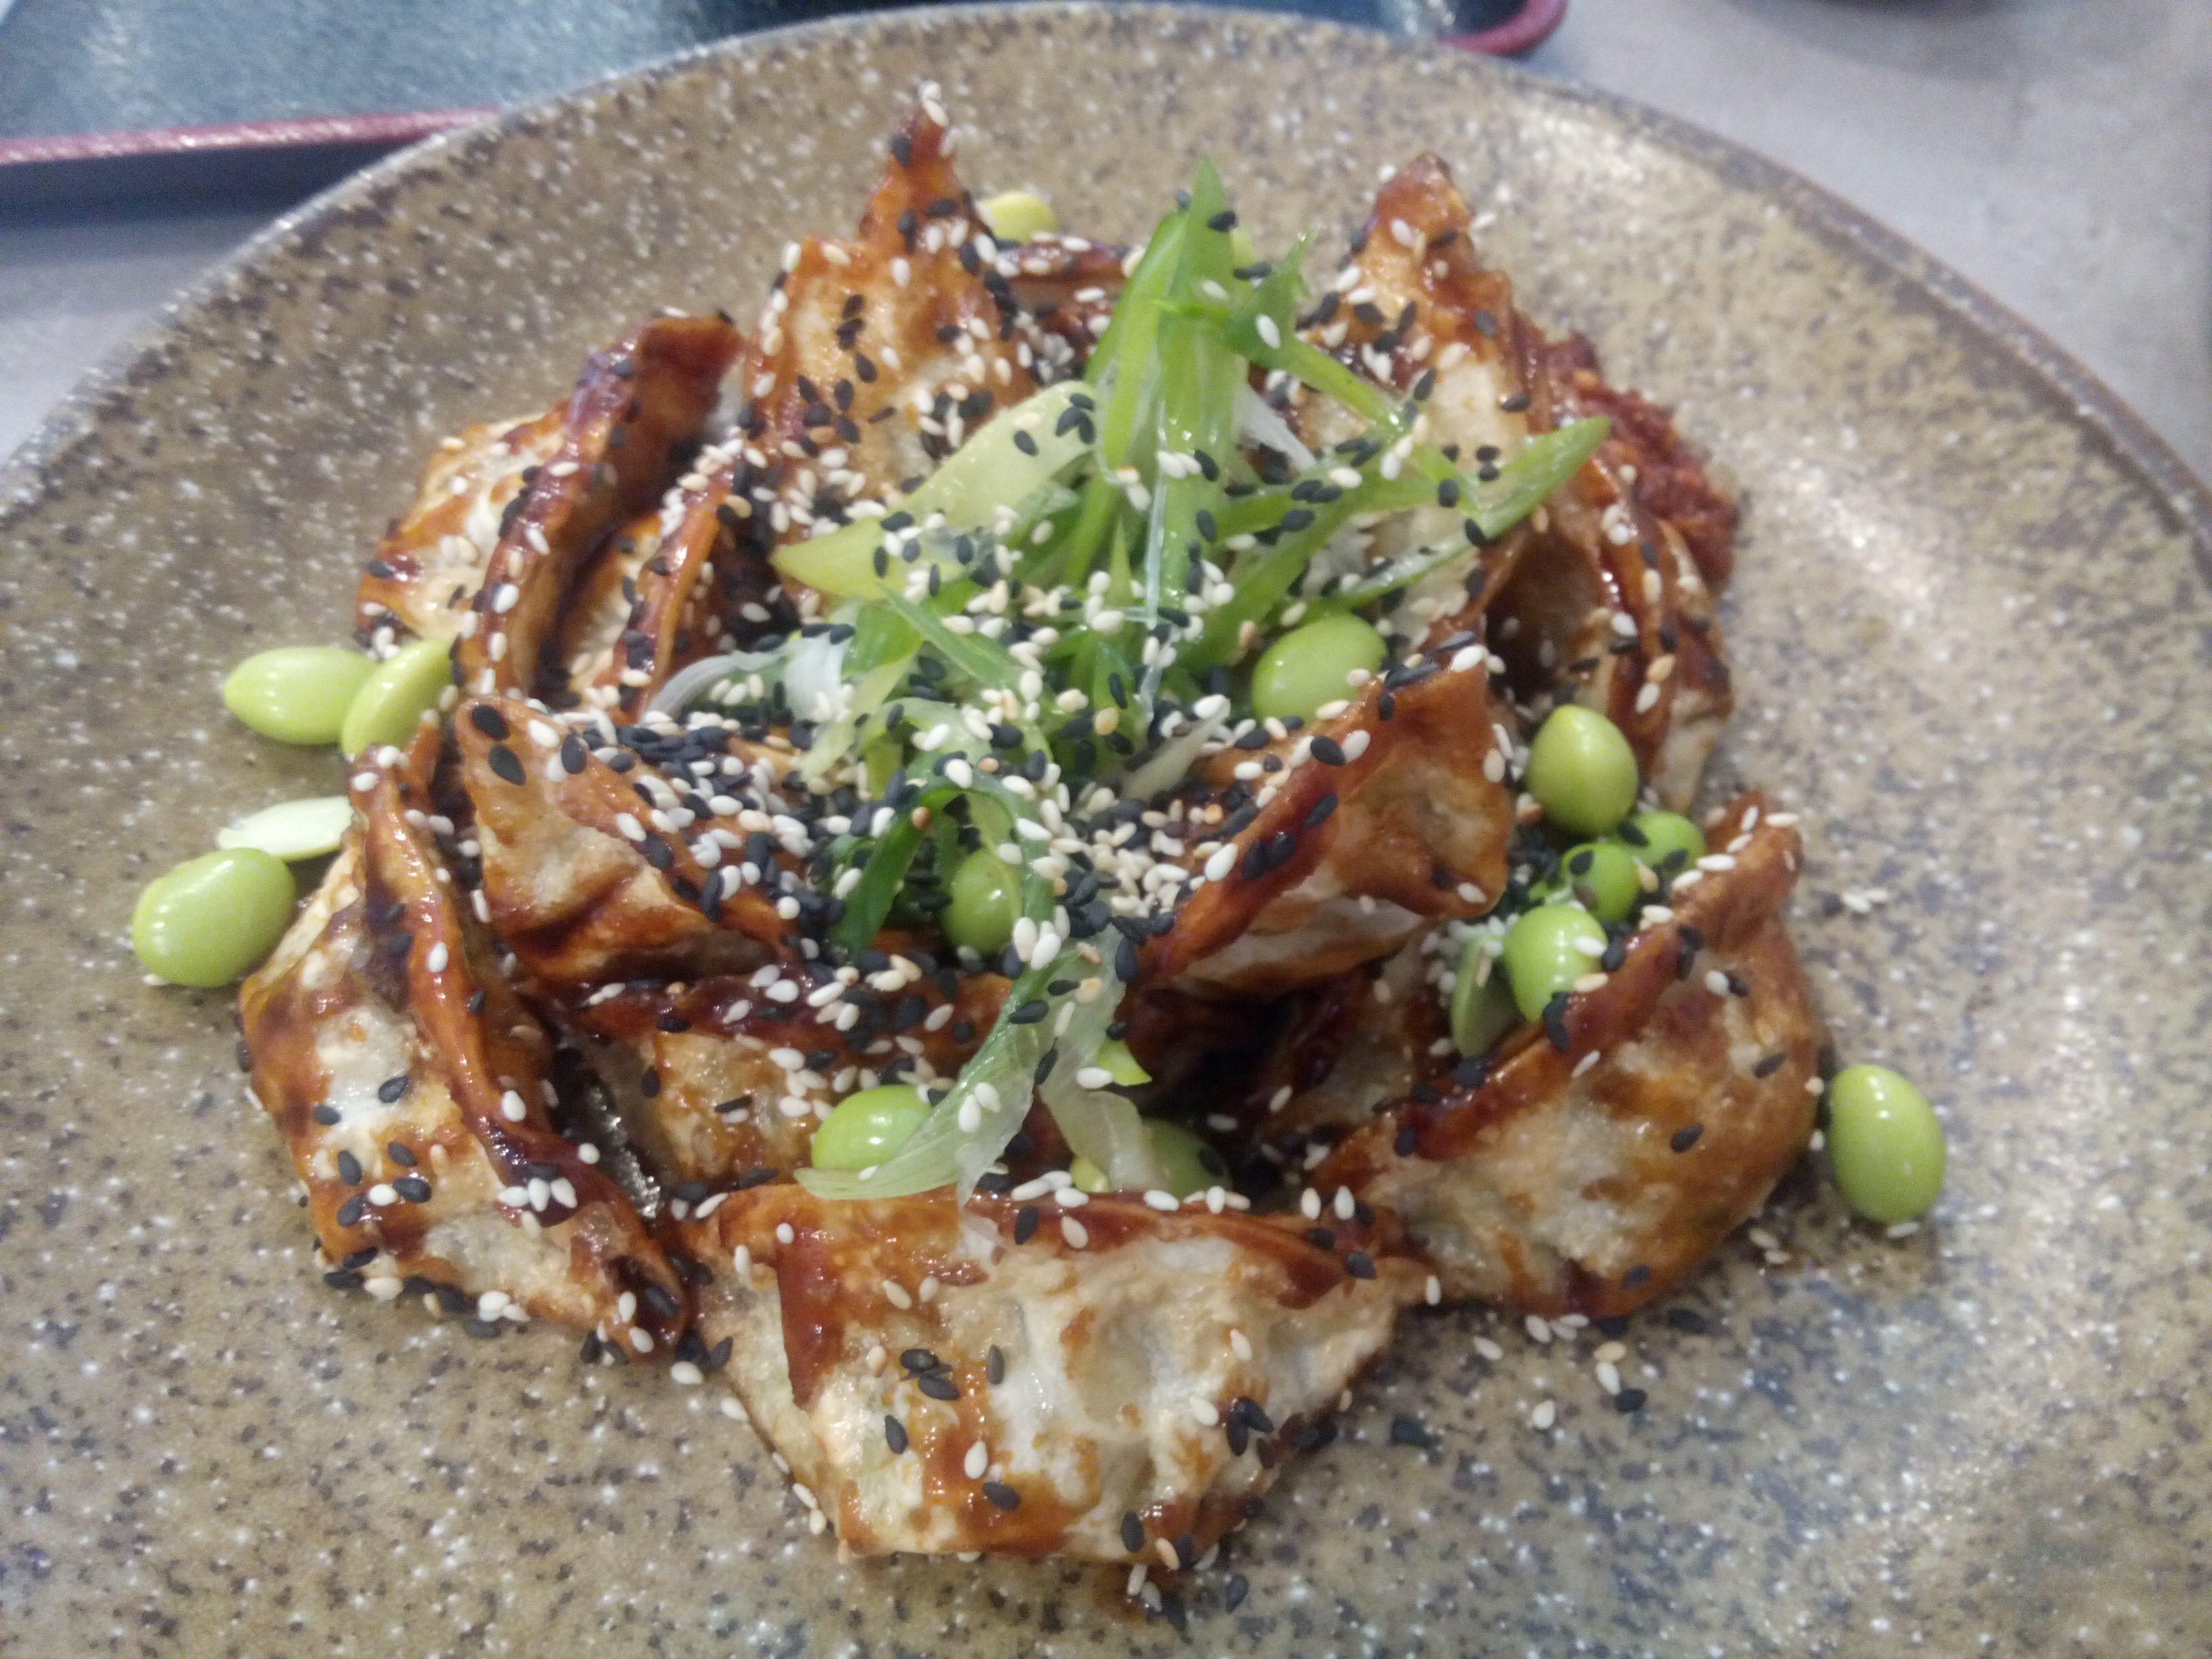 A speckled brown dish with a pile of dumplings, scattered with green soya beans, garnish and sesame seeds